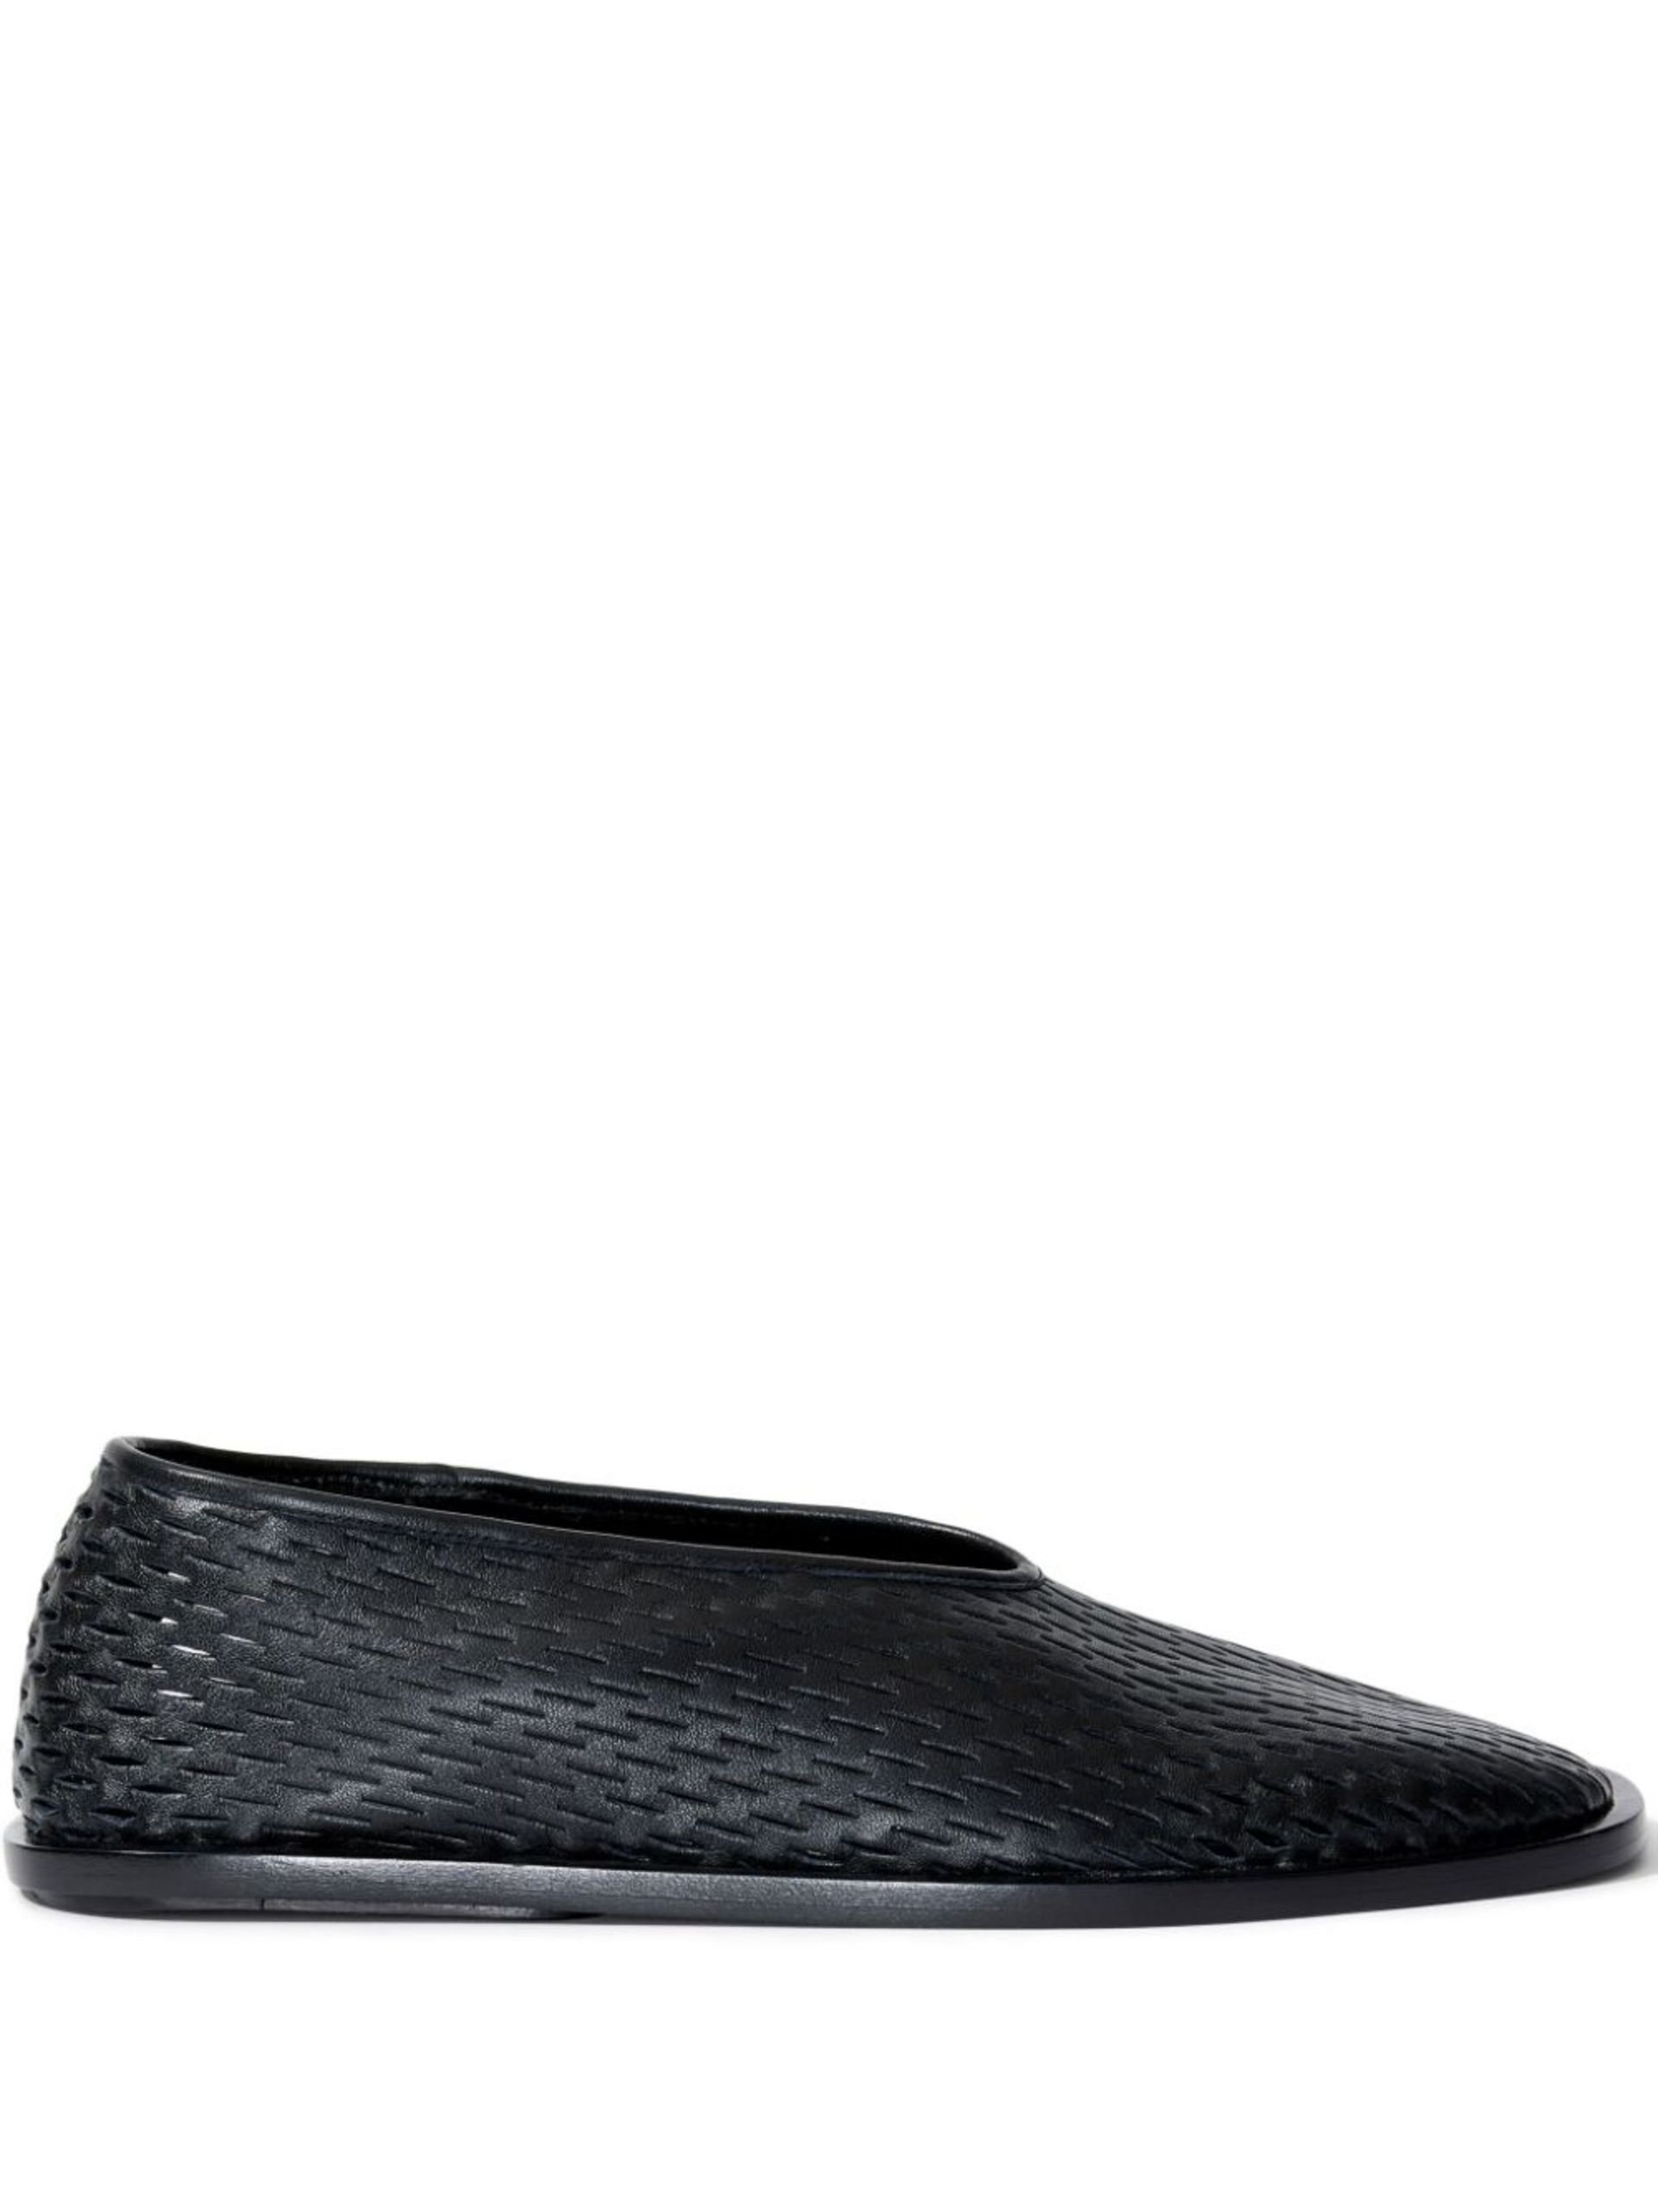 Black Perforated Leather Slippers - 1